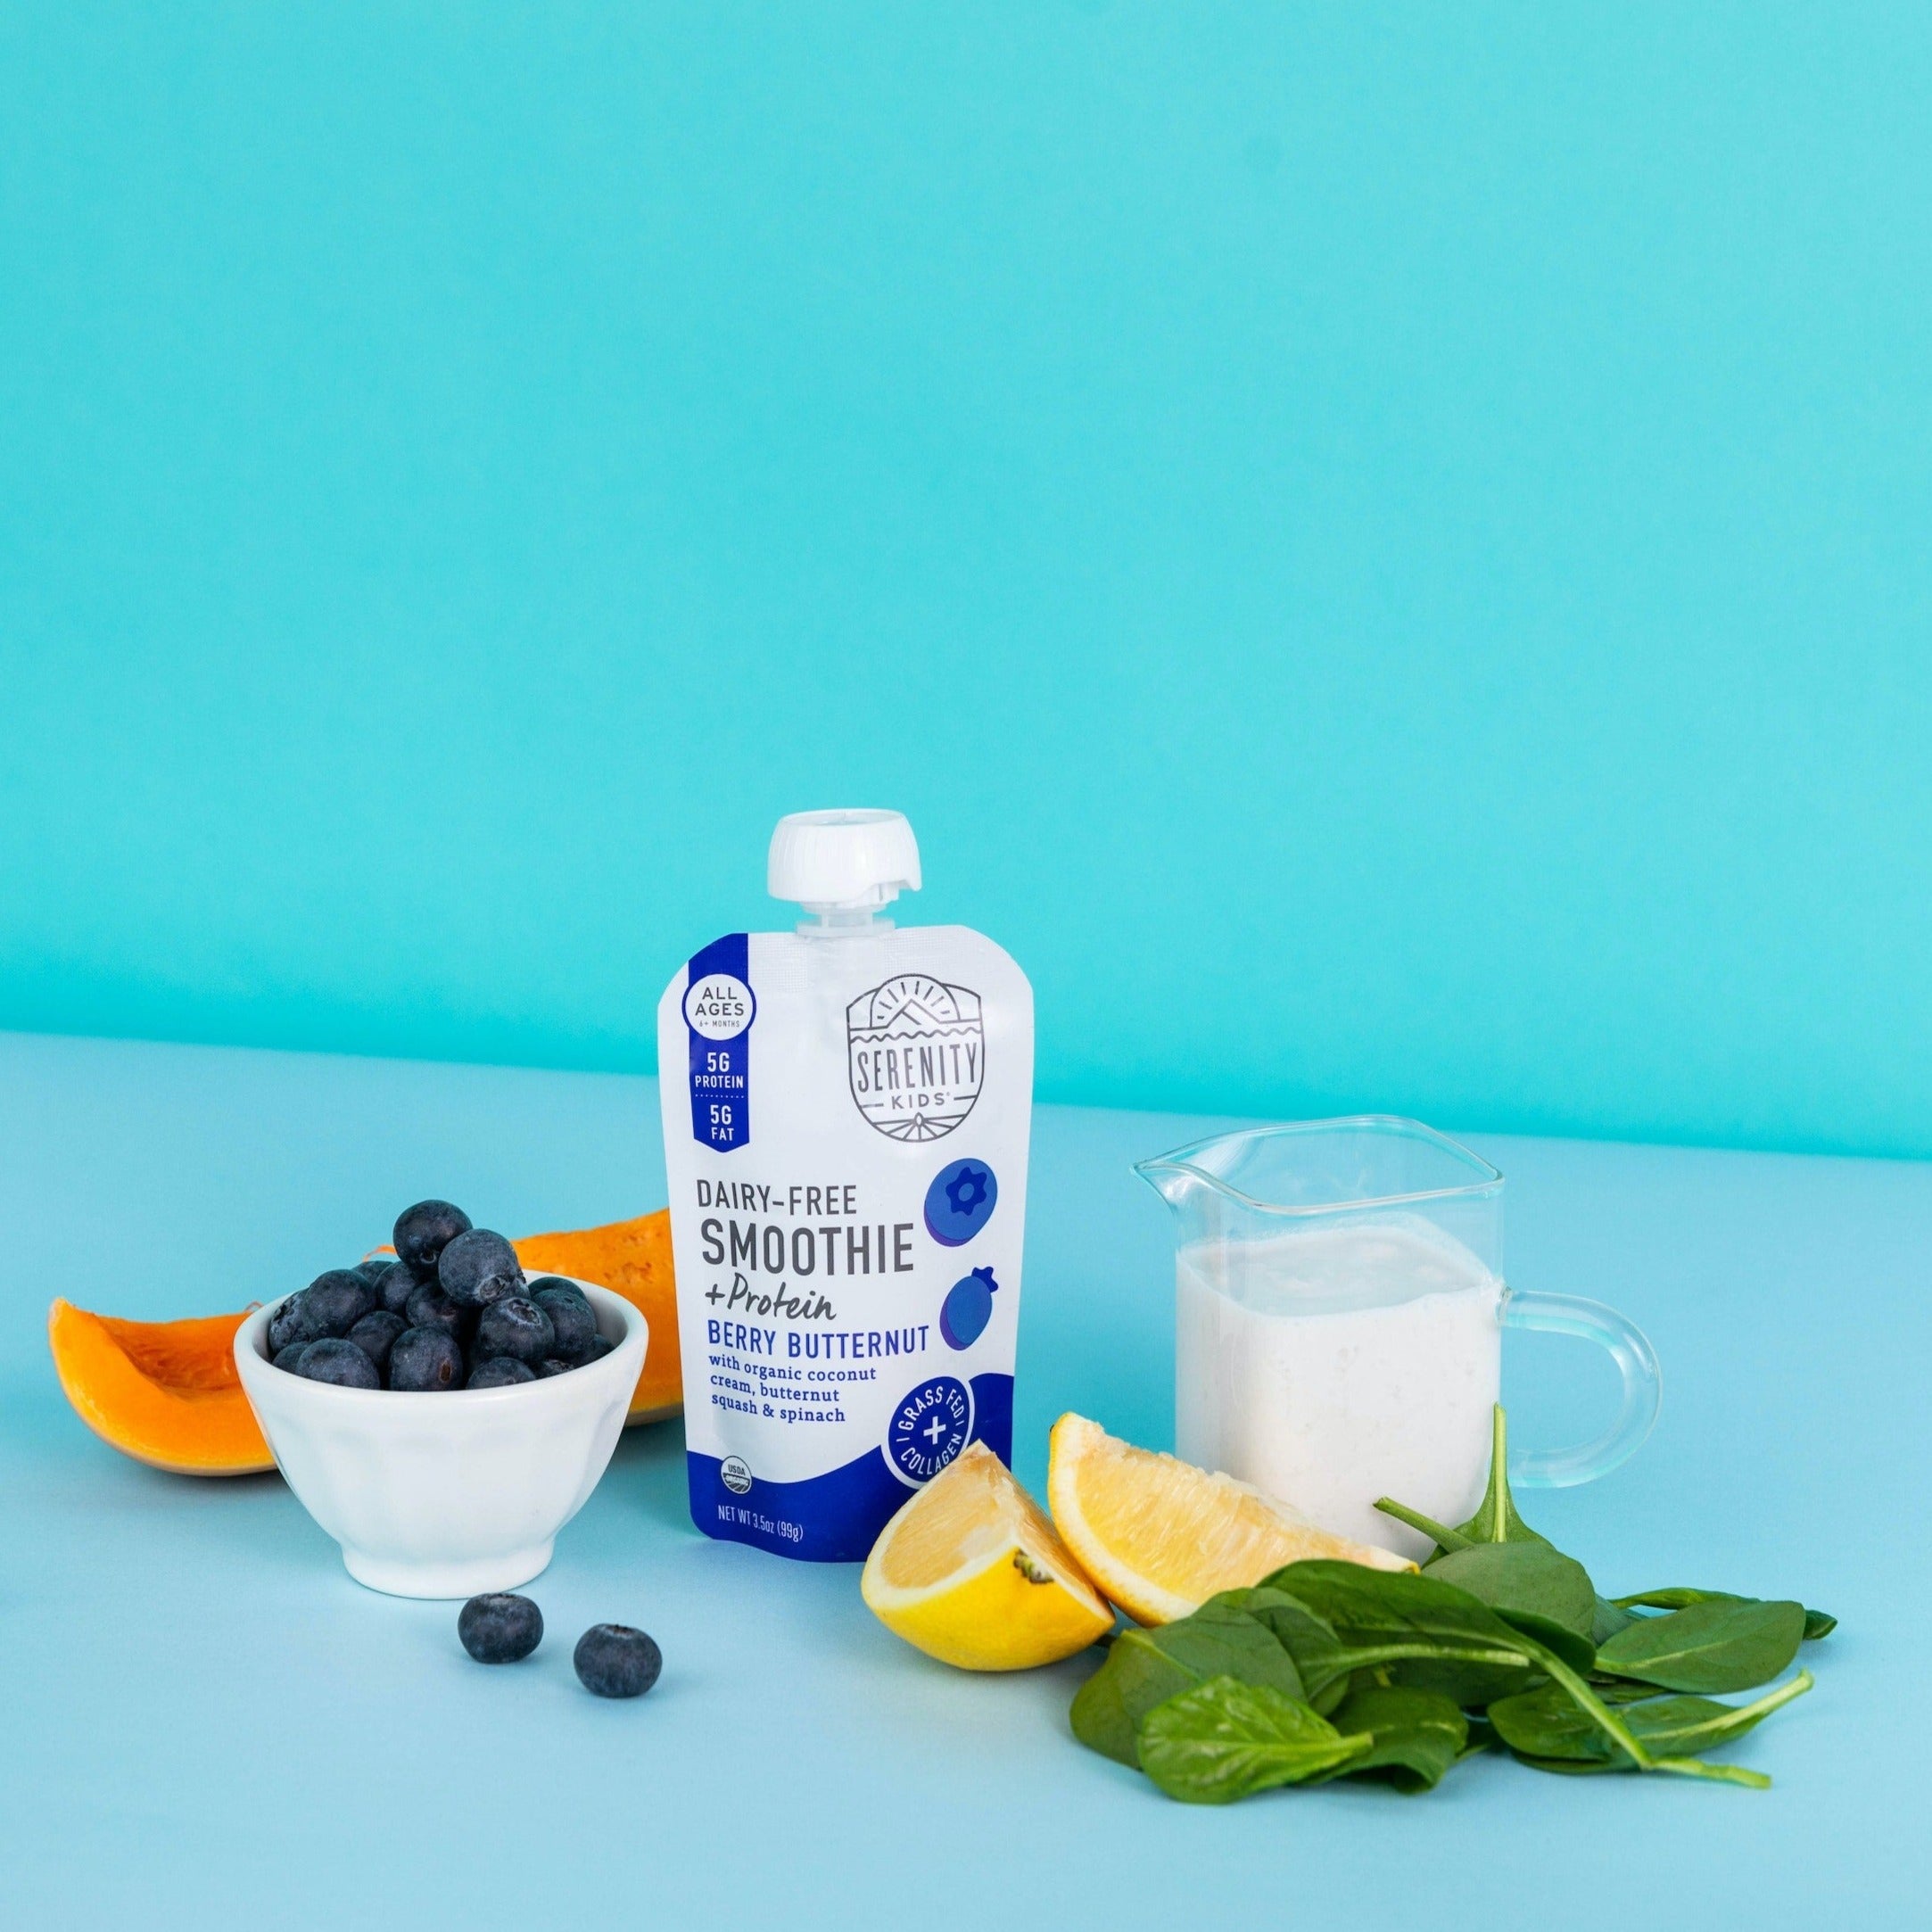 Berry Butternut Dairy-Free Smoothie + Protein - Serenity Kids - Pouch